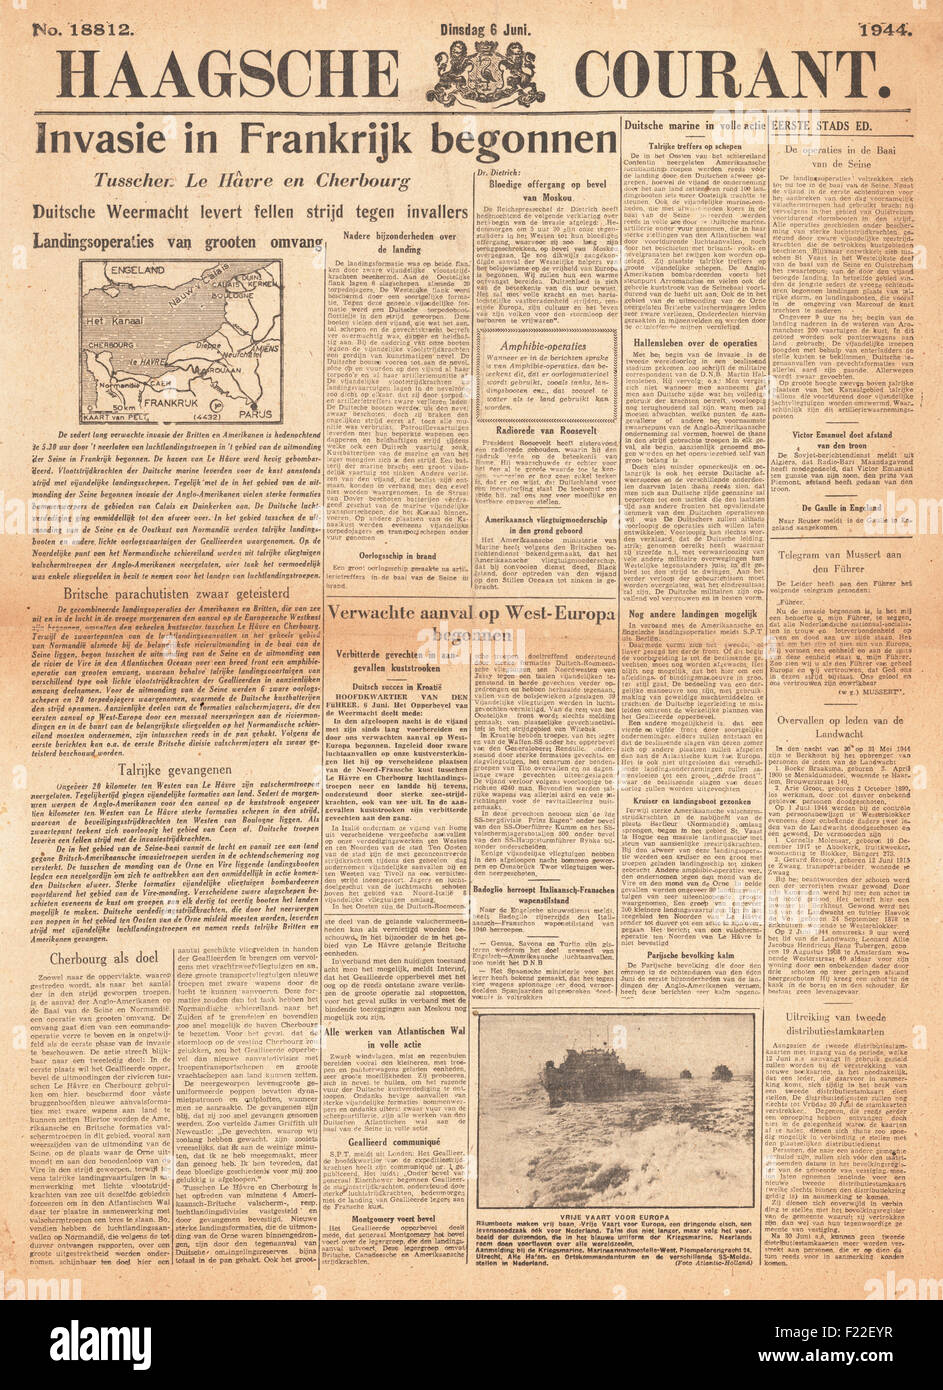 1944 Haagsche Courant (Holland) front page reporting D-Day landings of Allies at Normandy Stock Photo